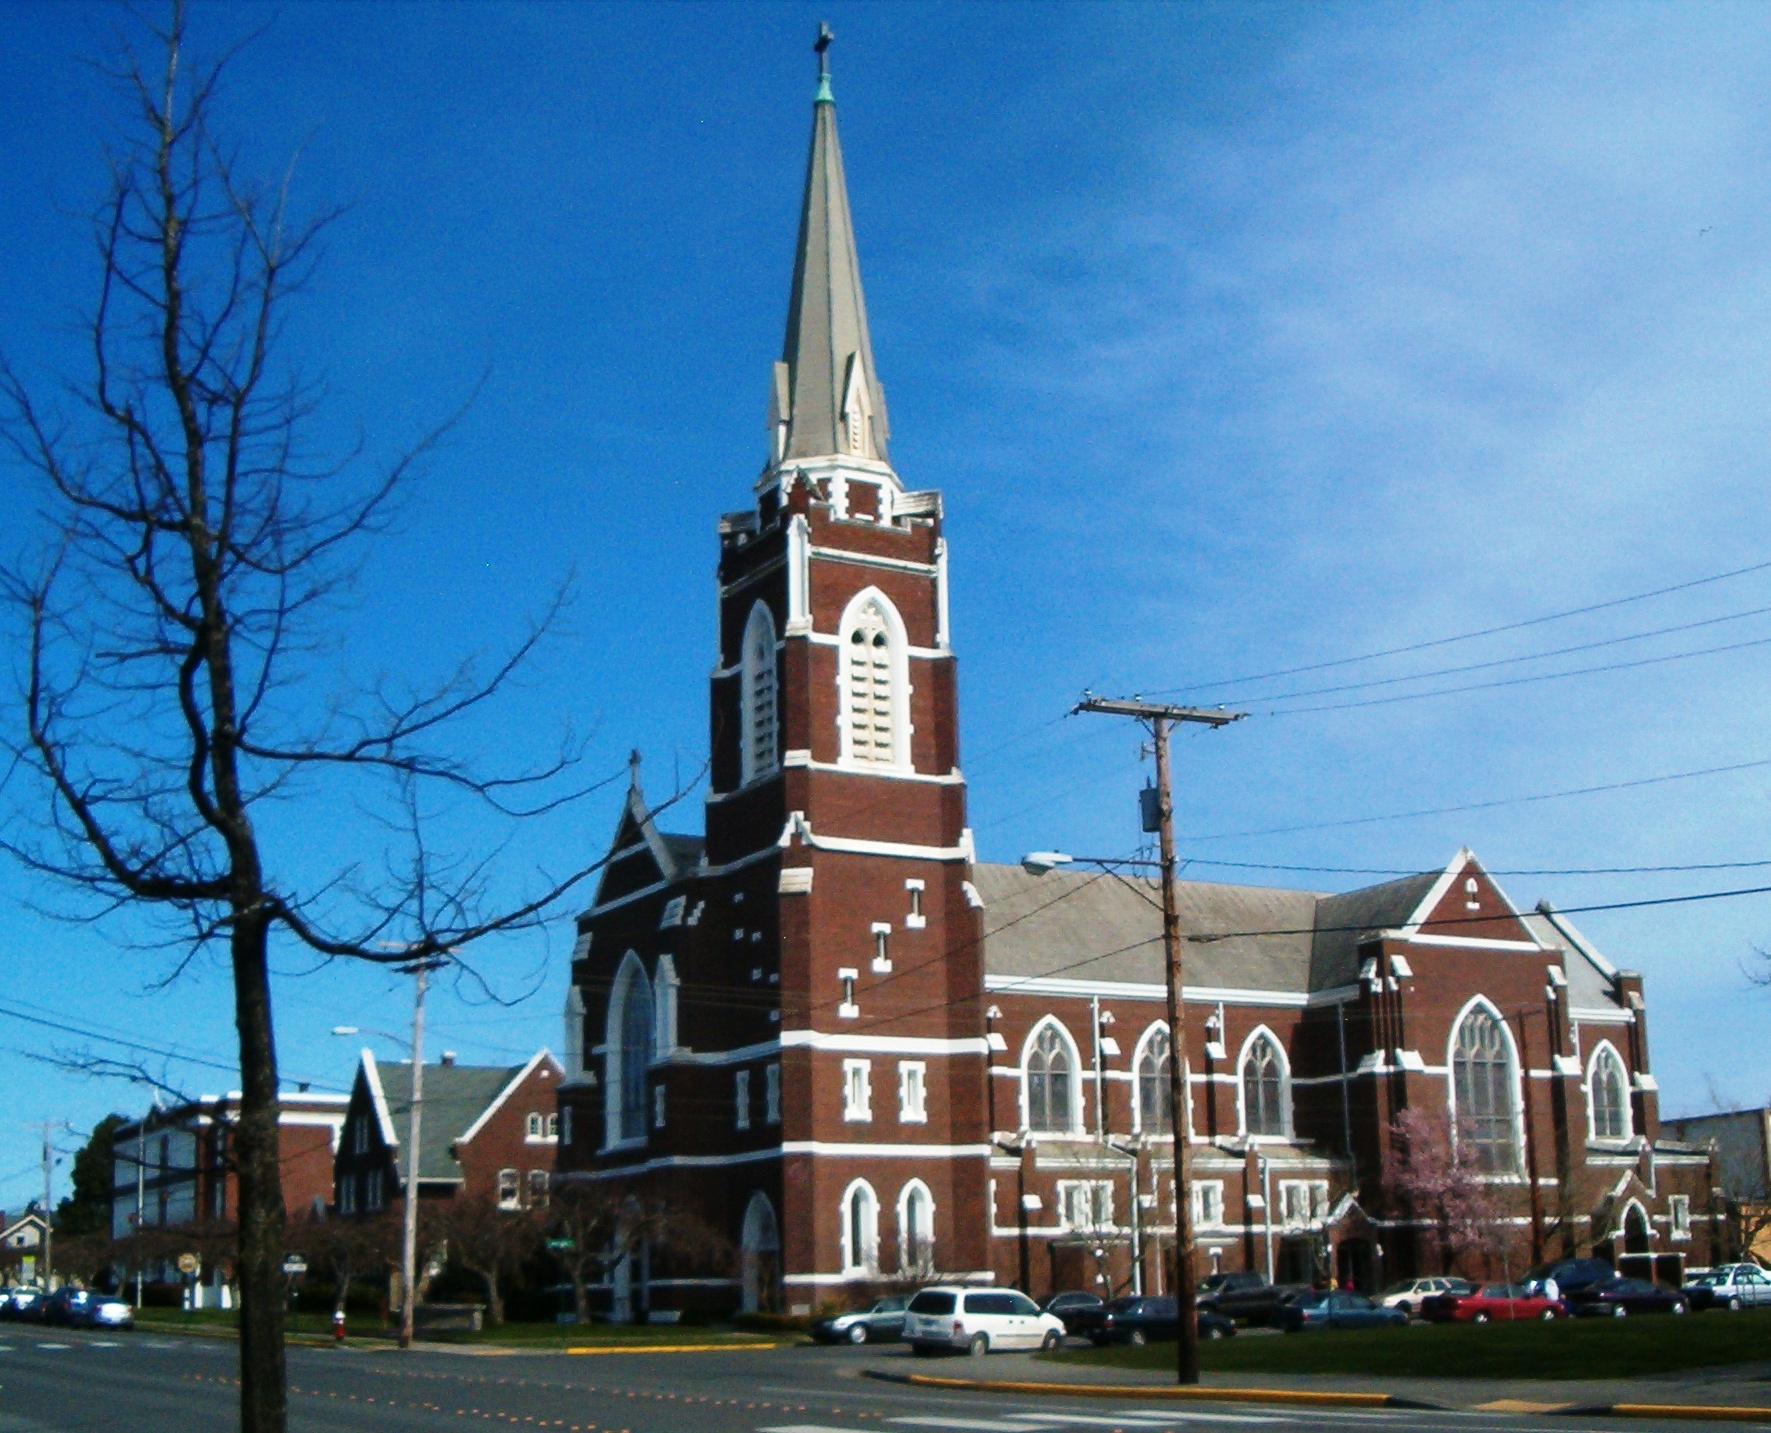 large brick church on a street corner with a pointy steeple